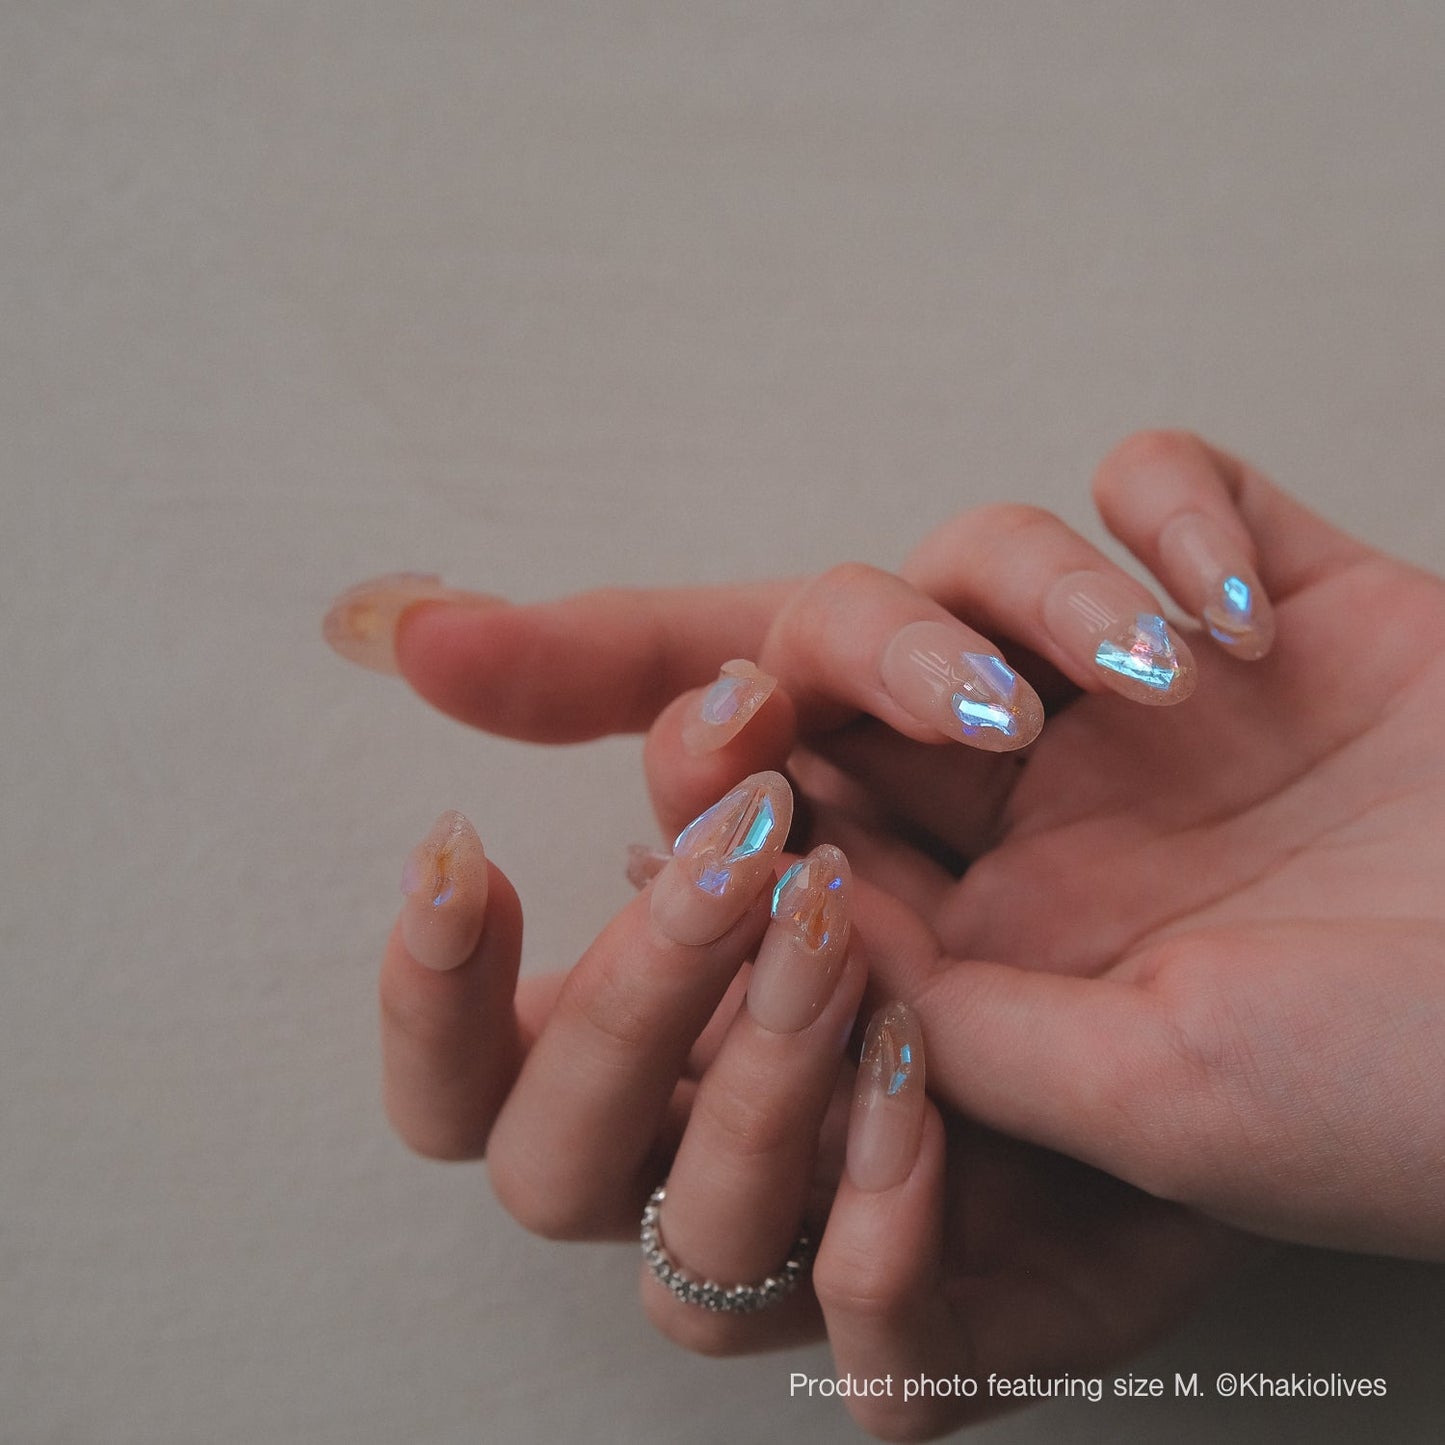 Backorder | Fairytale - with Swarovski nail crystals (Est. delivery 15-30th Jan)